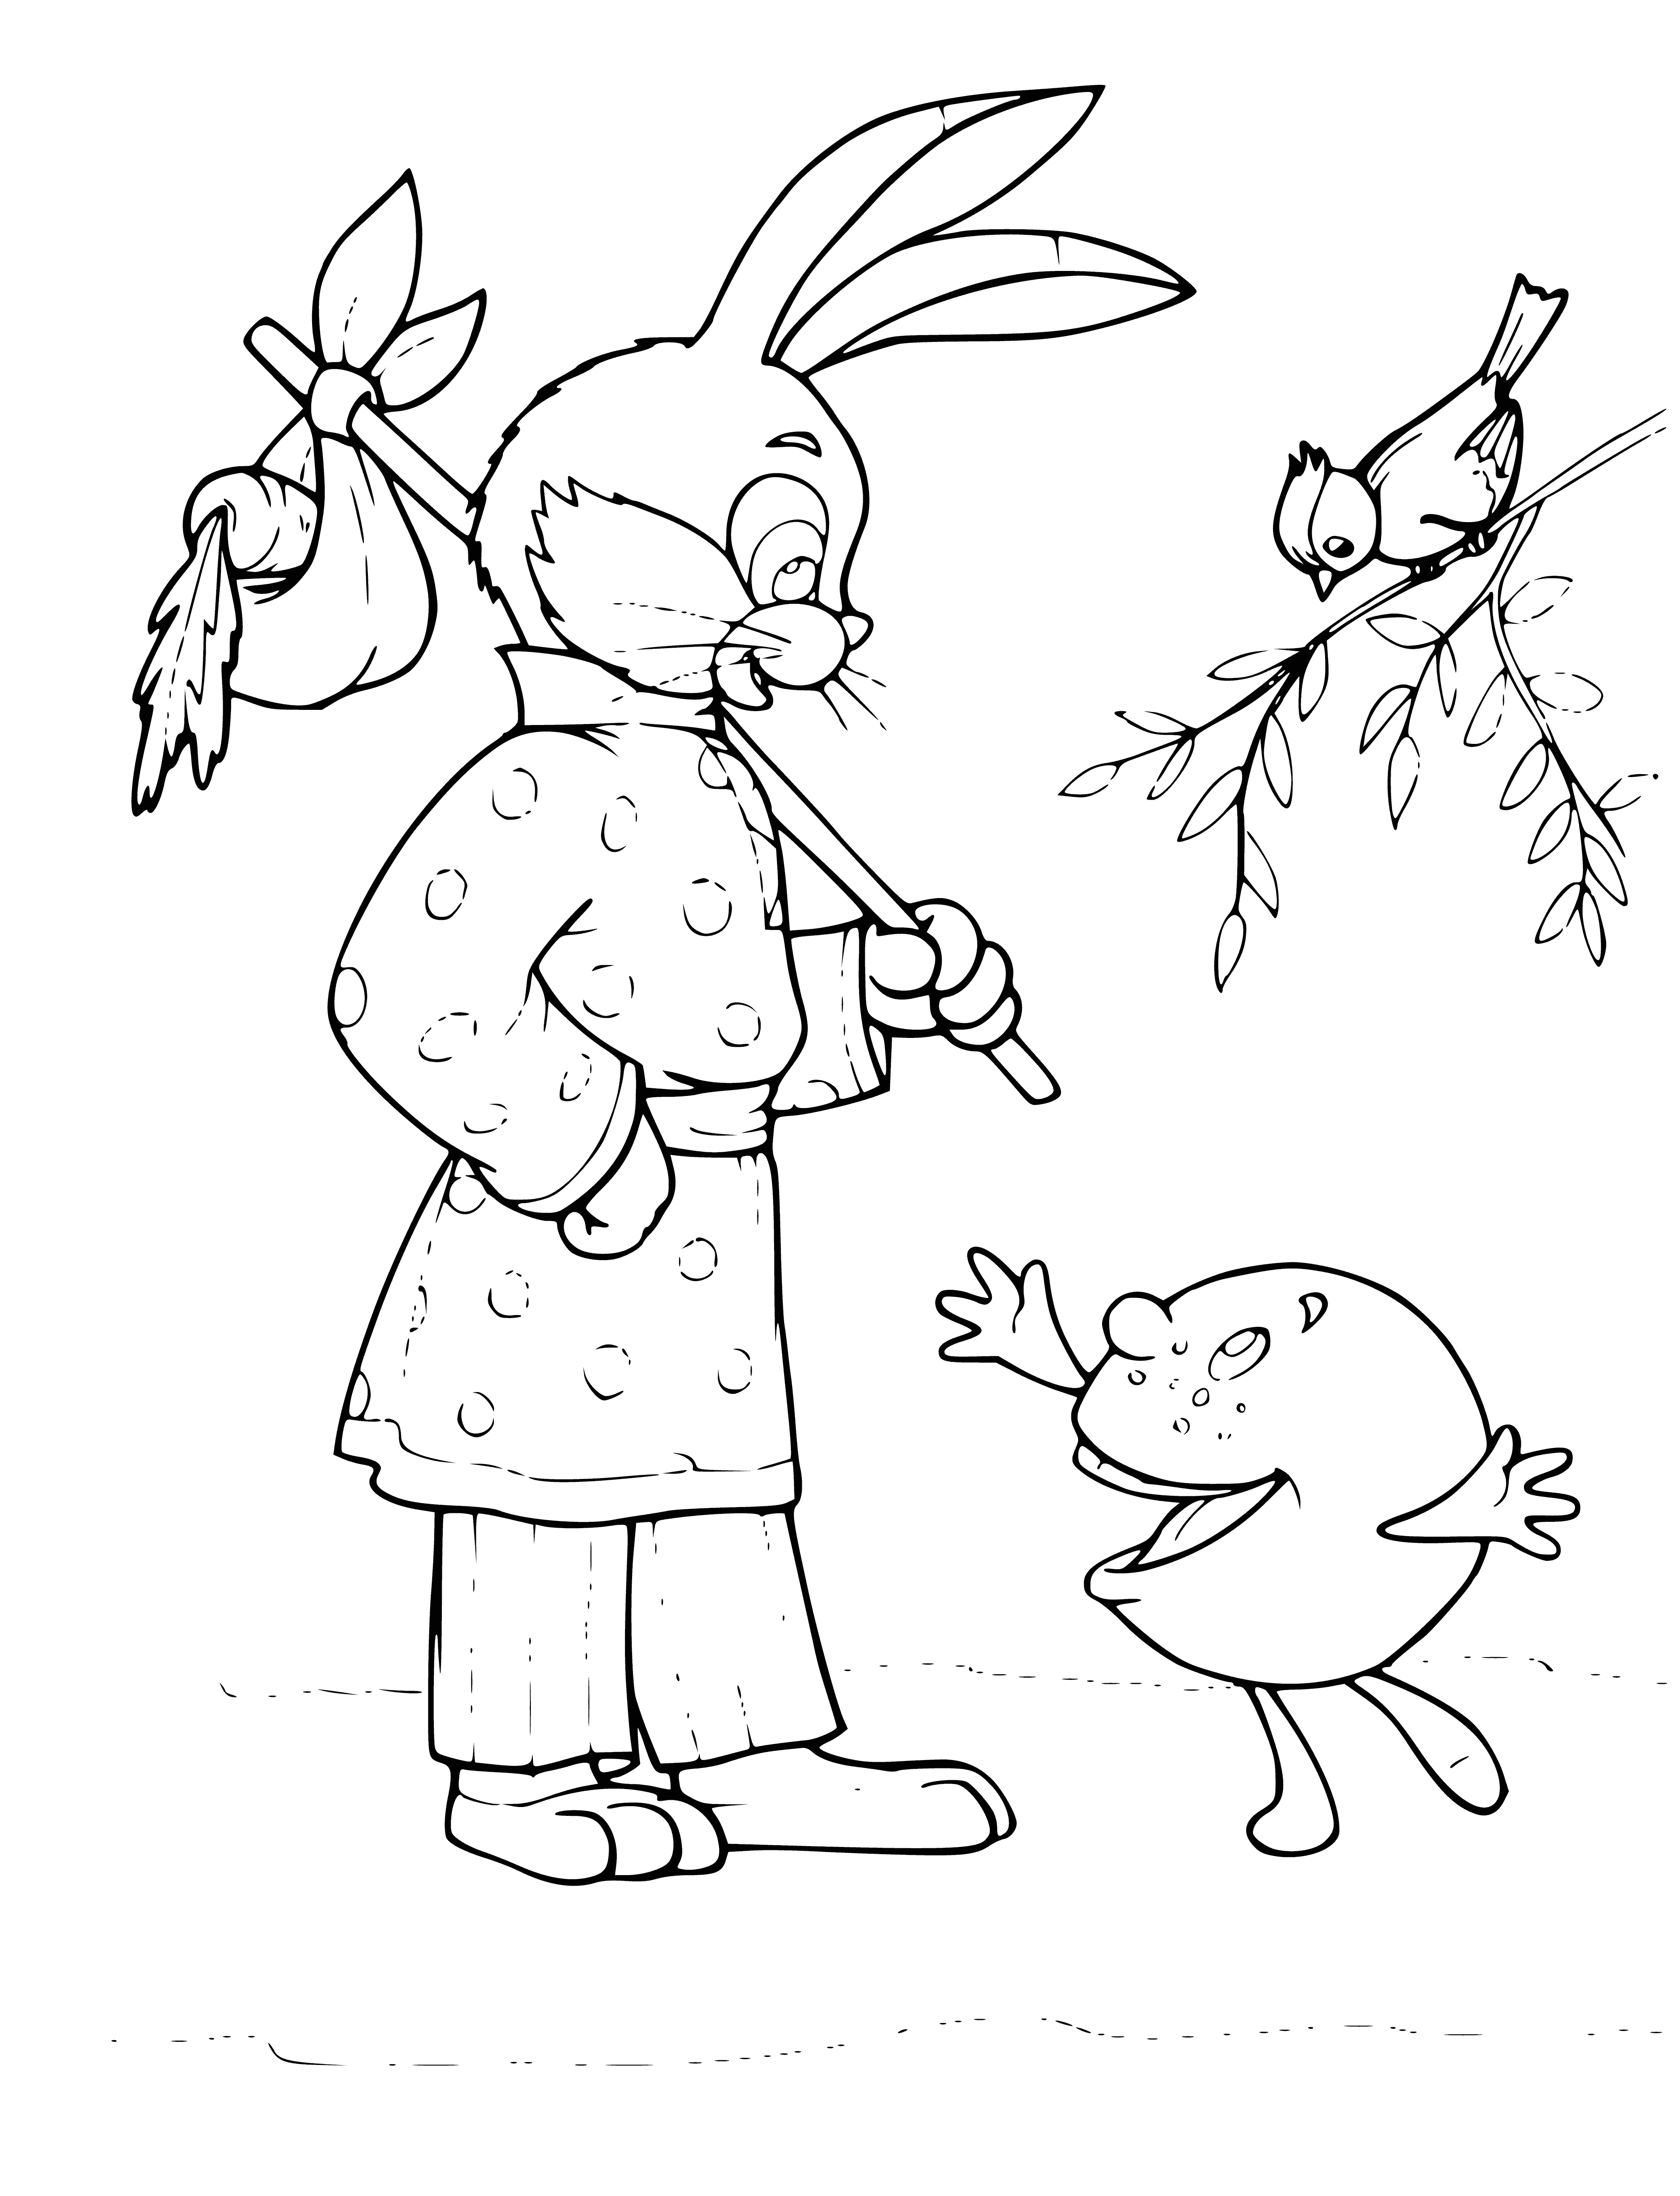 Gingerbread man and hare coloring page